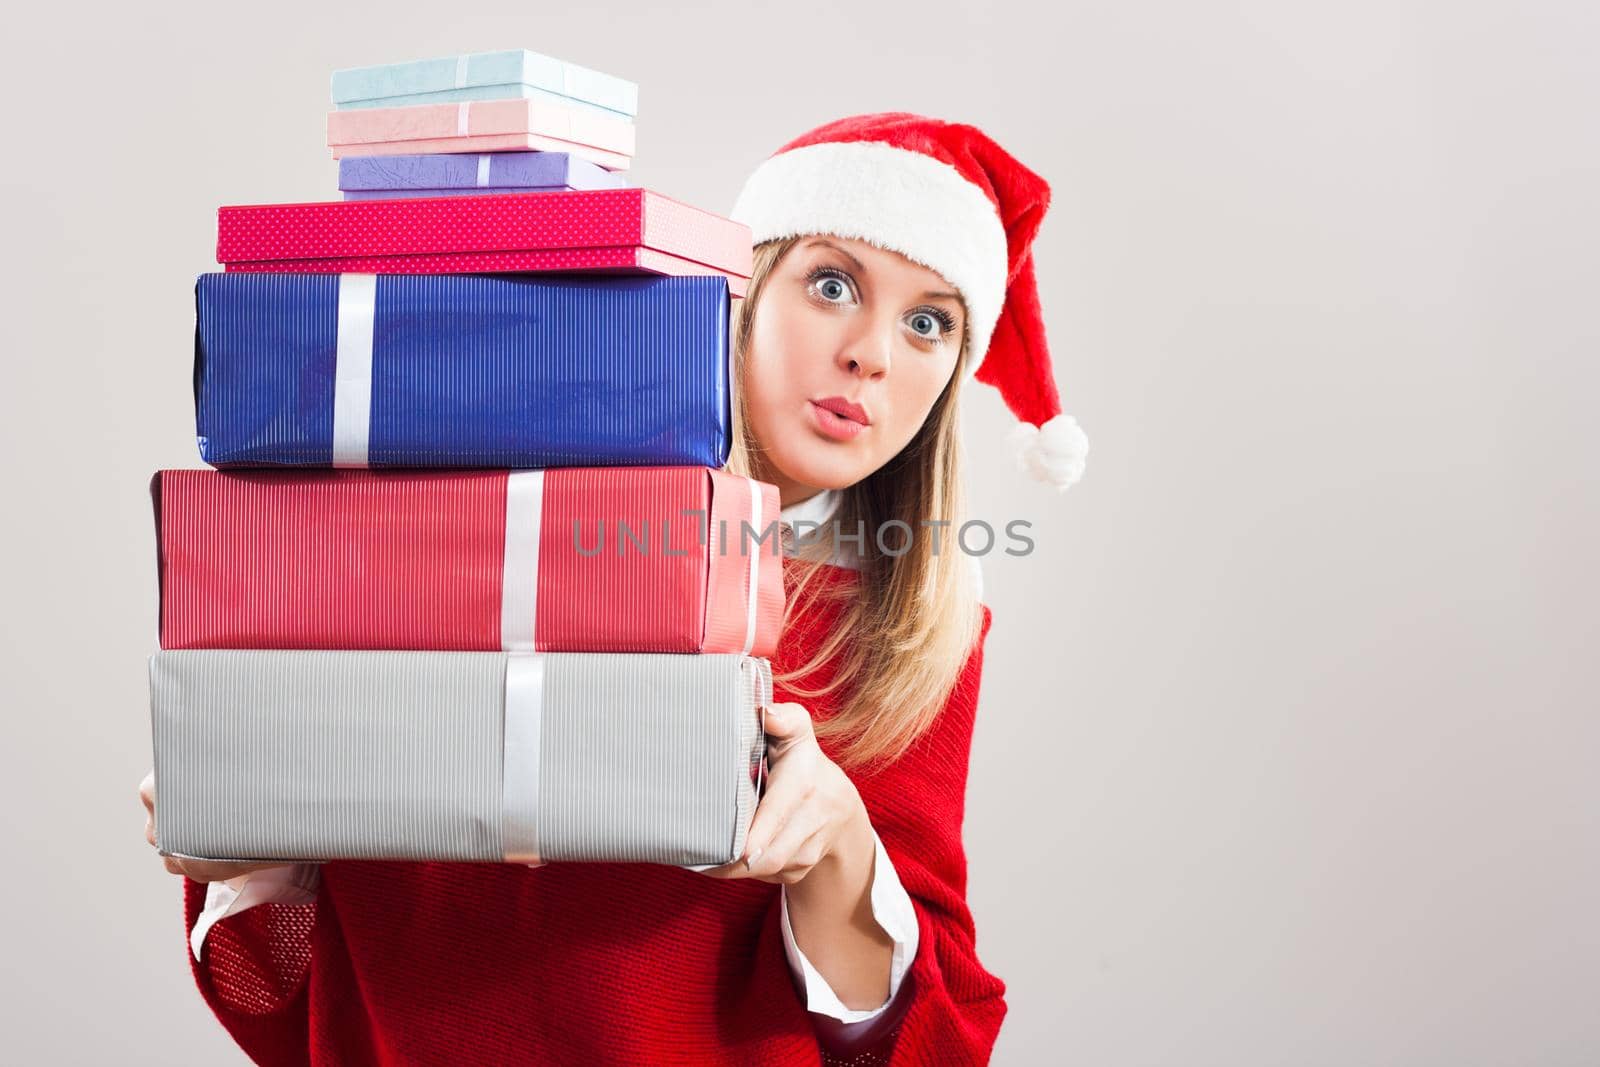 Woman holding Christmas presents by Bazdar